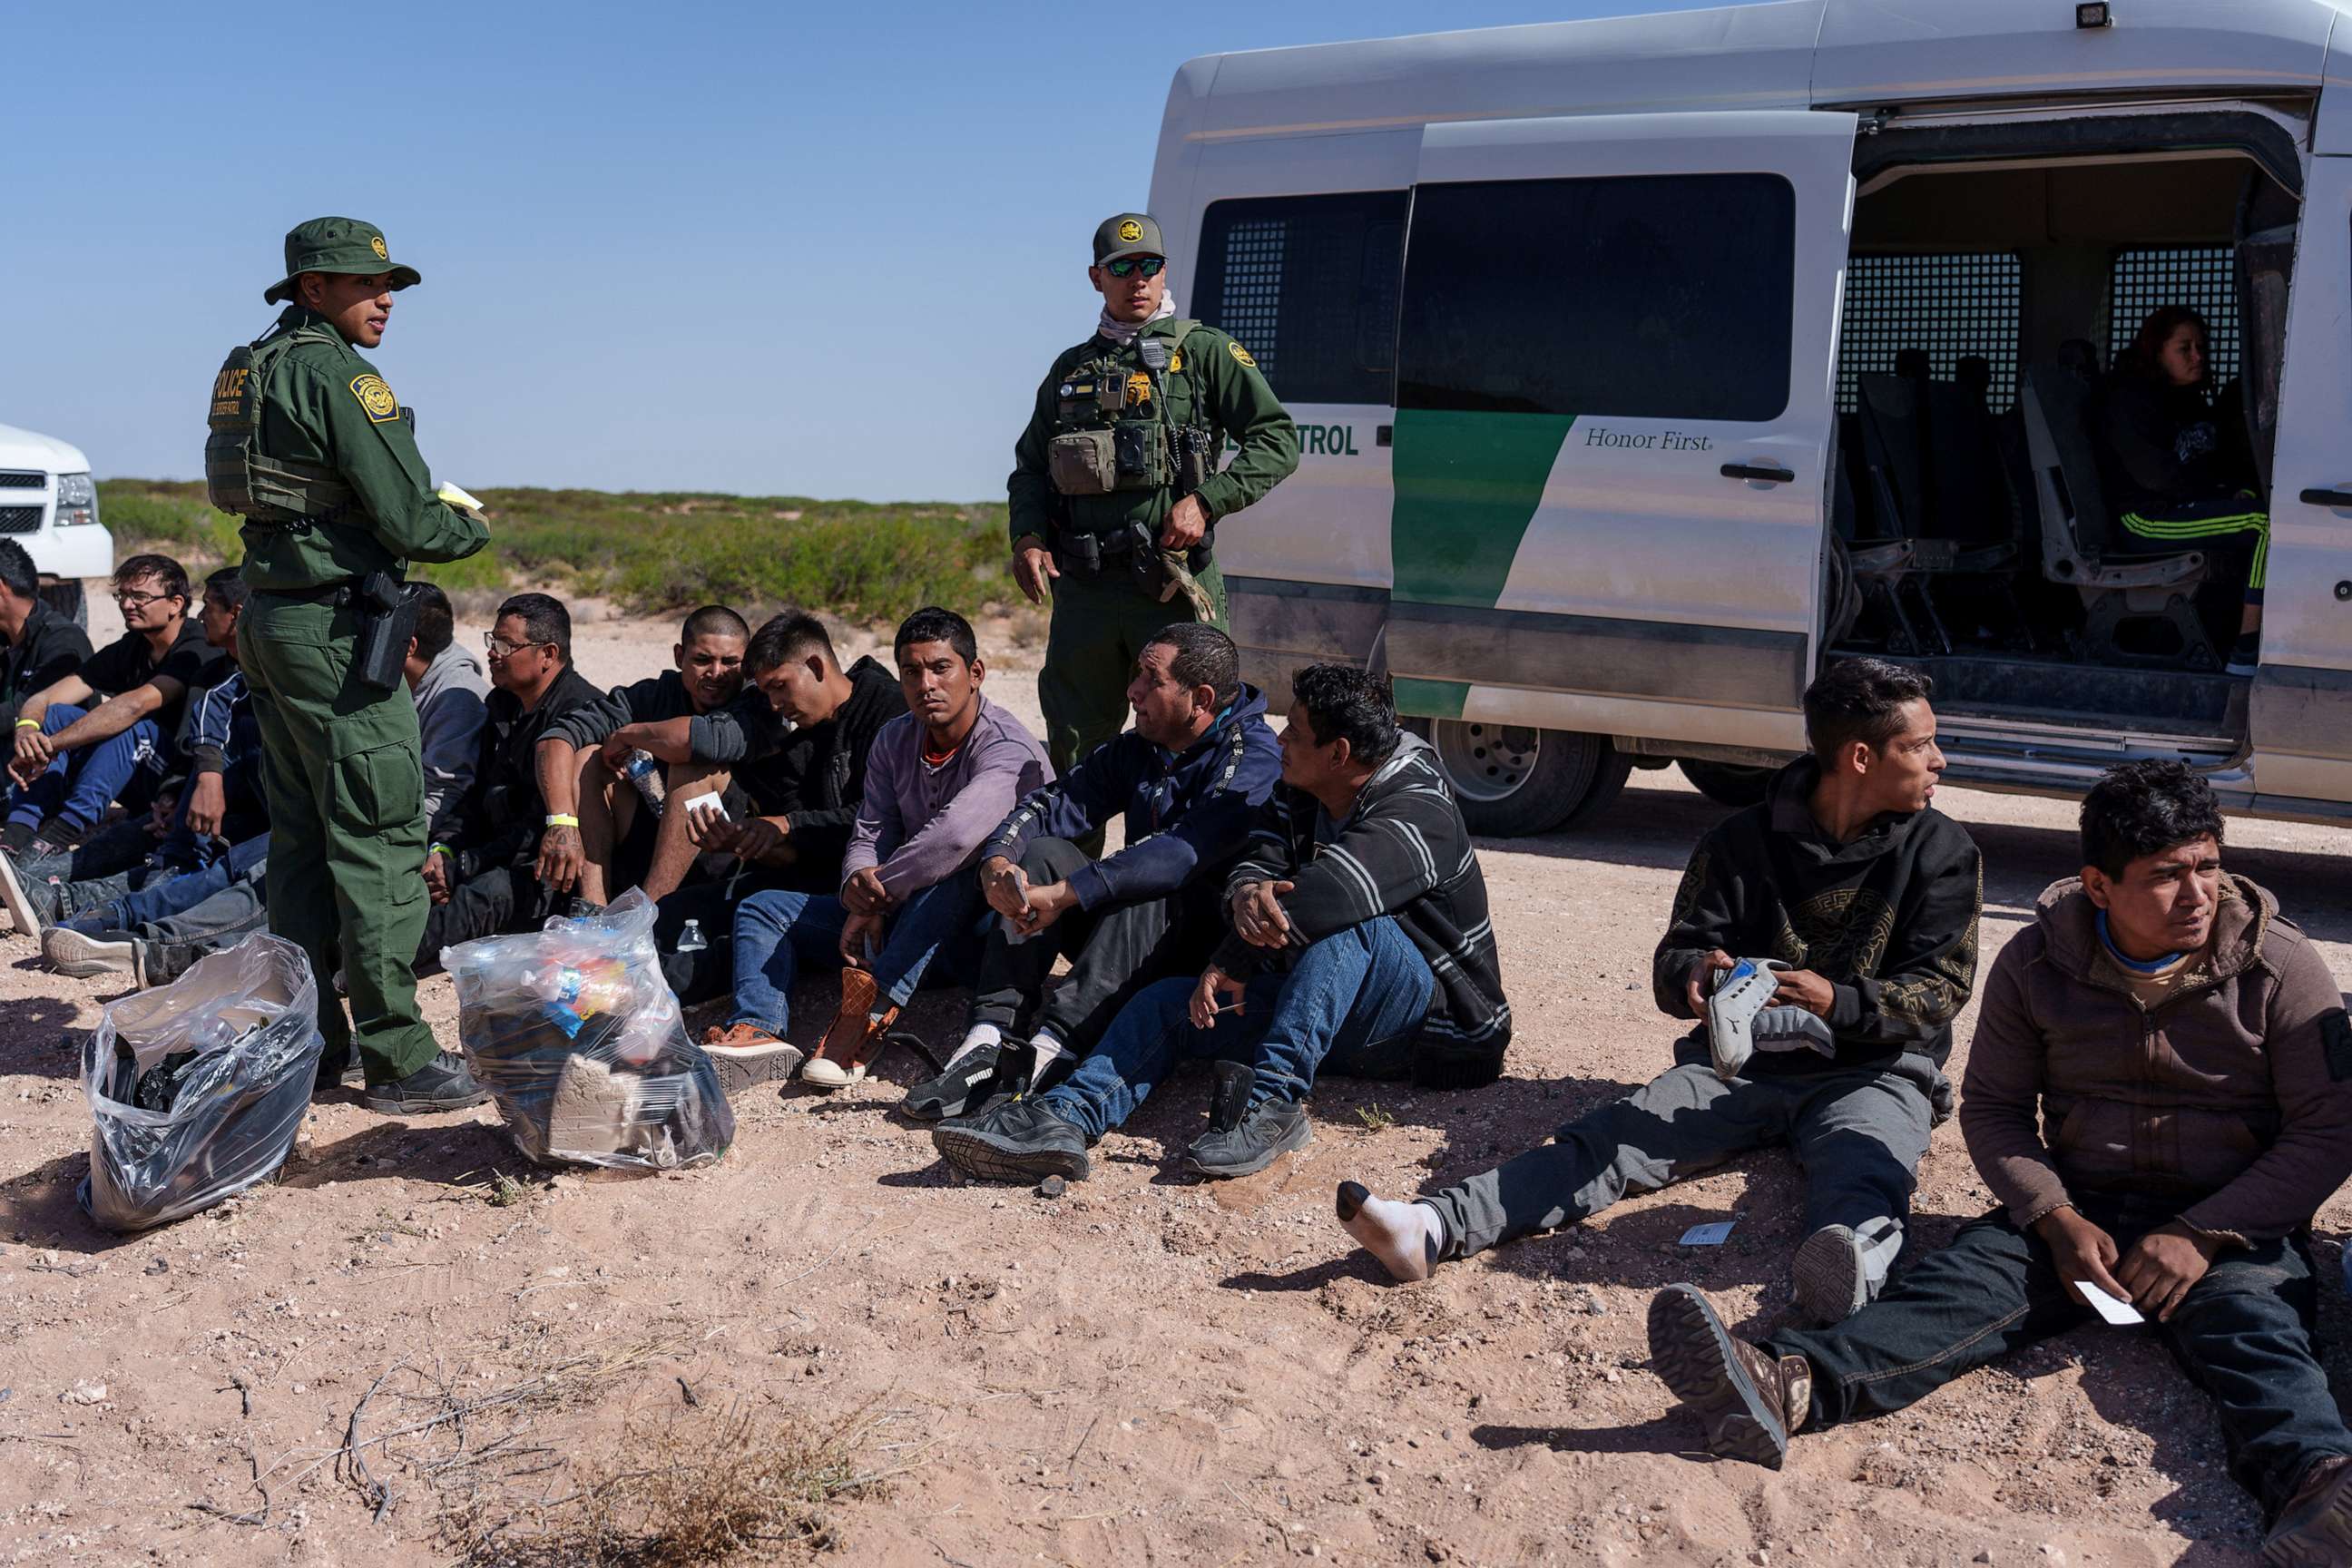 PHOTO: A group of 28 migrants wait to be processed by United States Border Patrol agents, after being apprehended trying to cross the border undetected, in Santa Teresa, New Mexico, April 26, 2023.